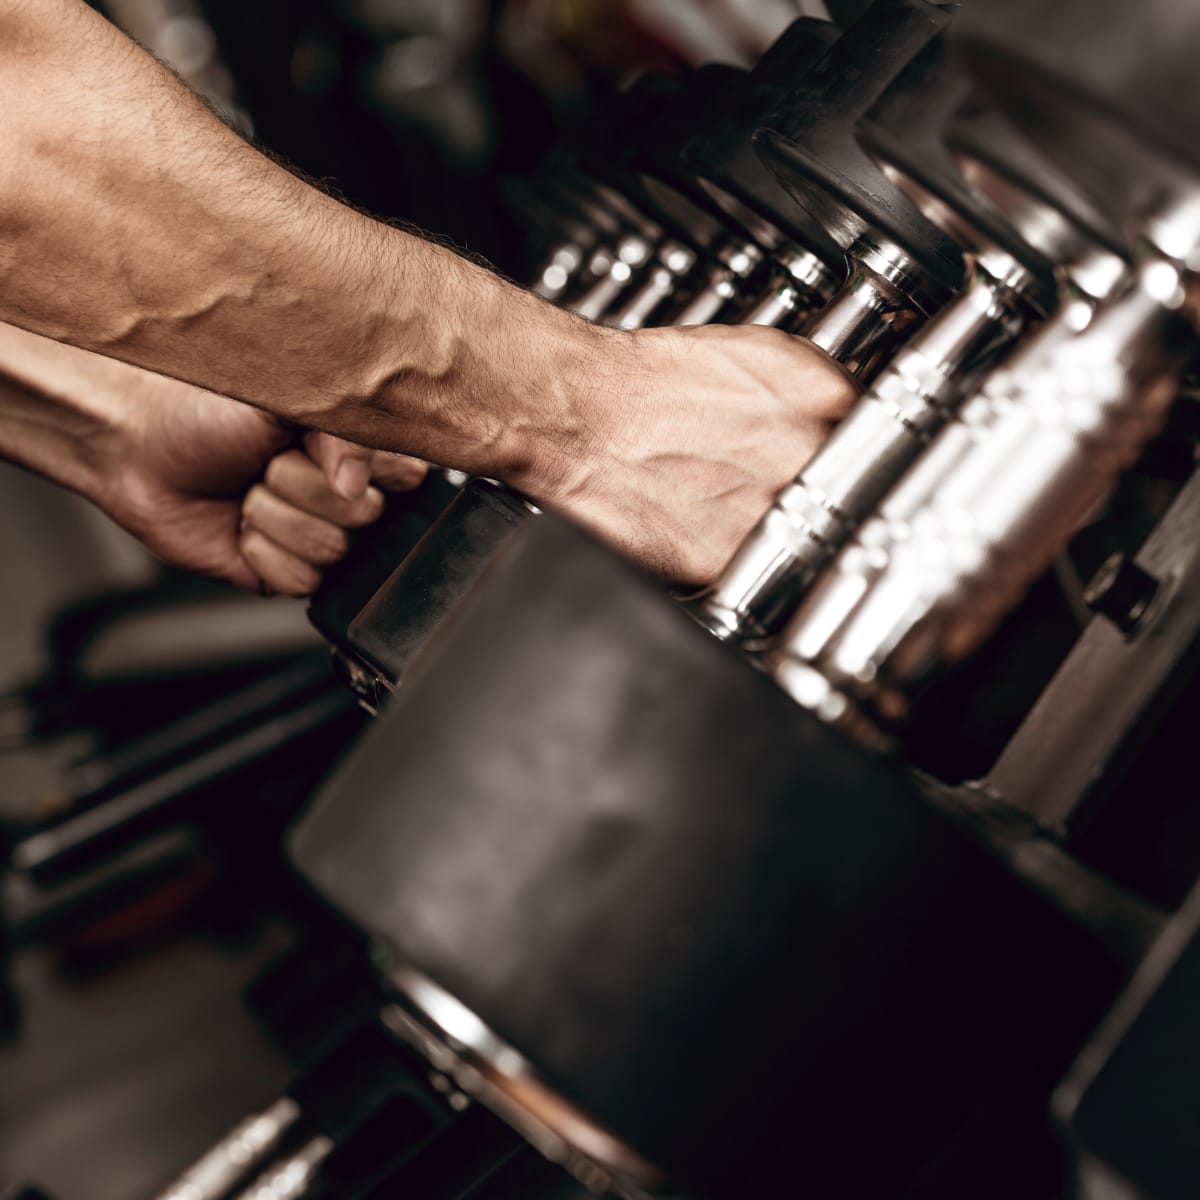 Need Gym Motivation? Here's 15 Ways To Get Pumped